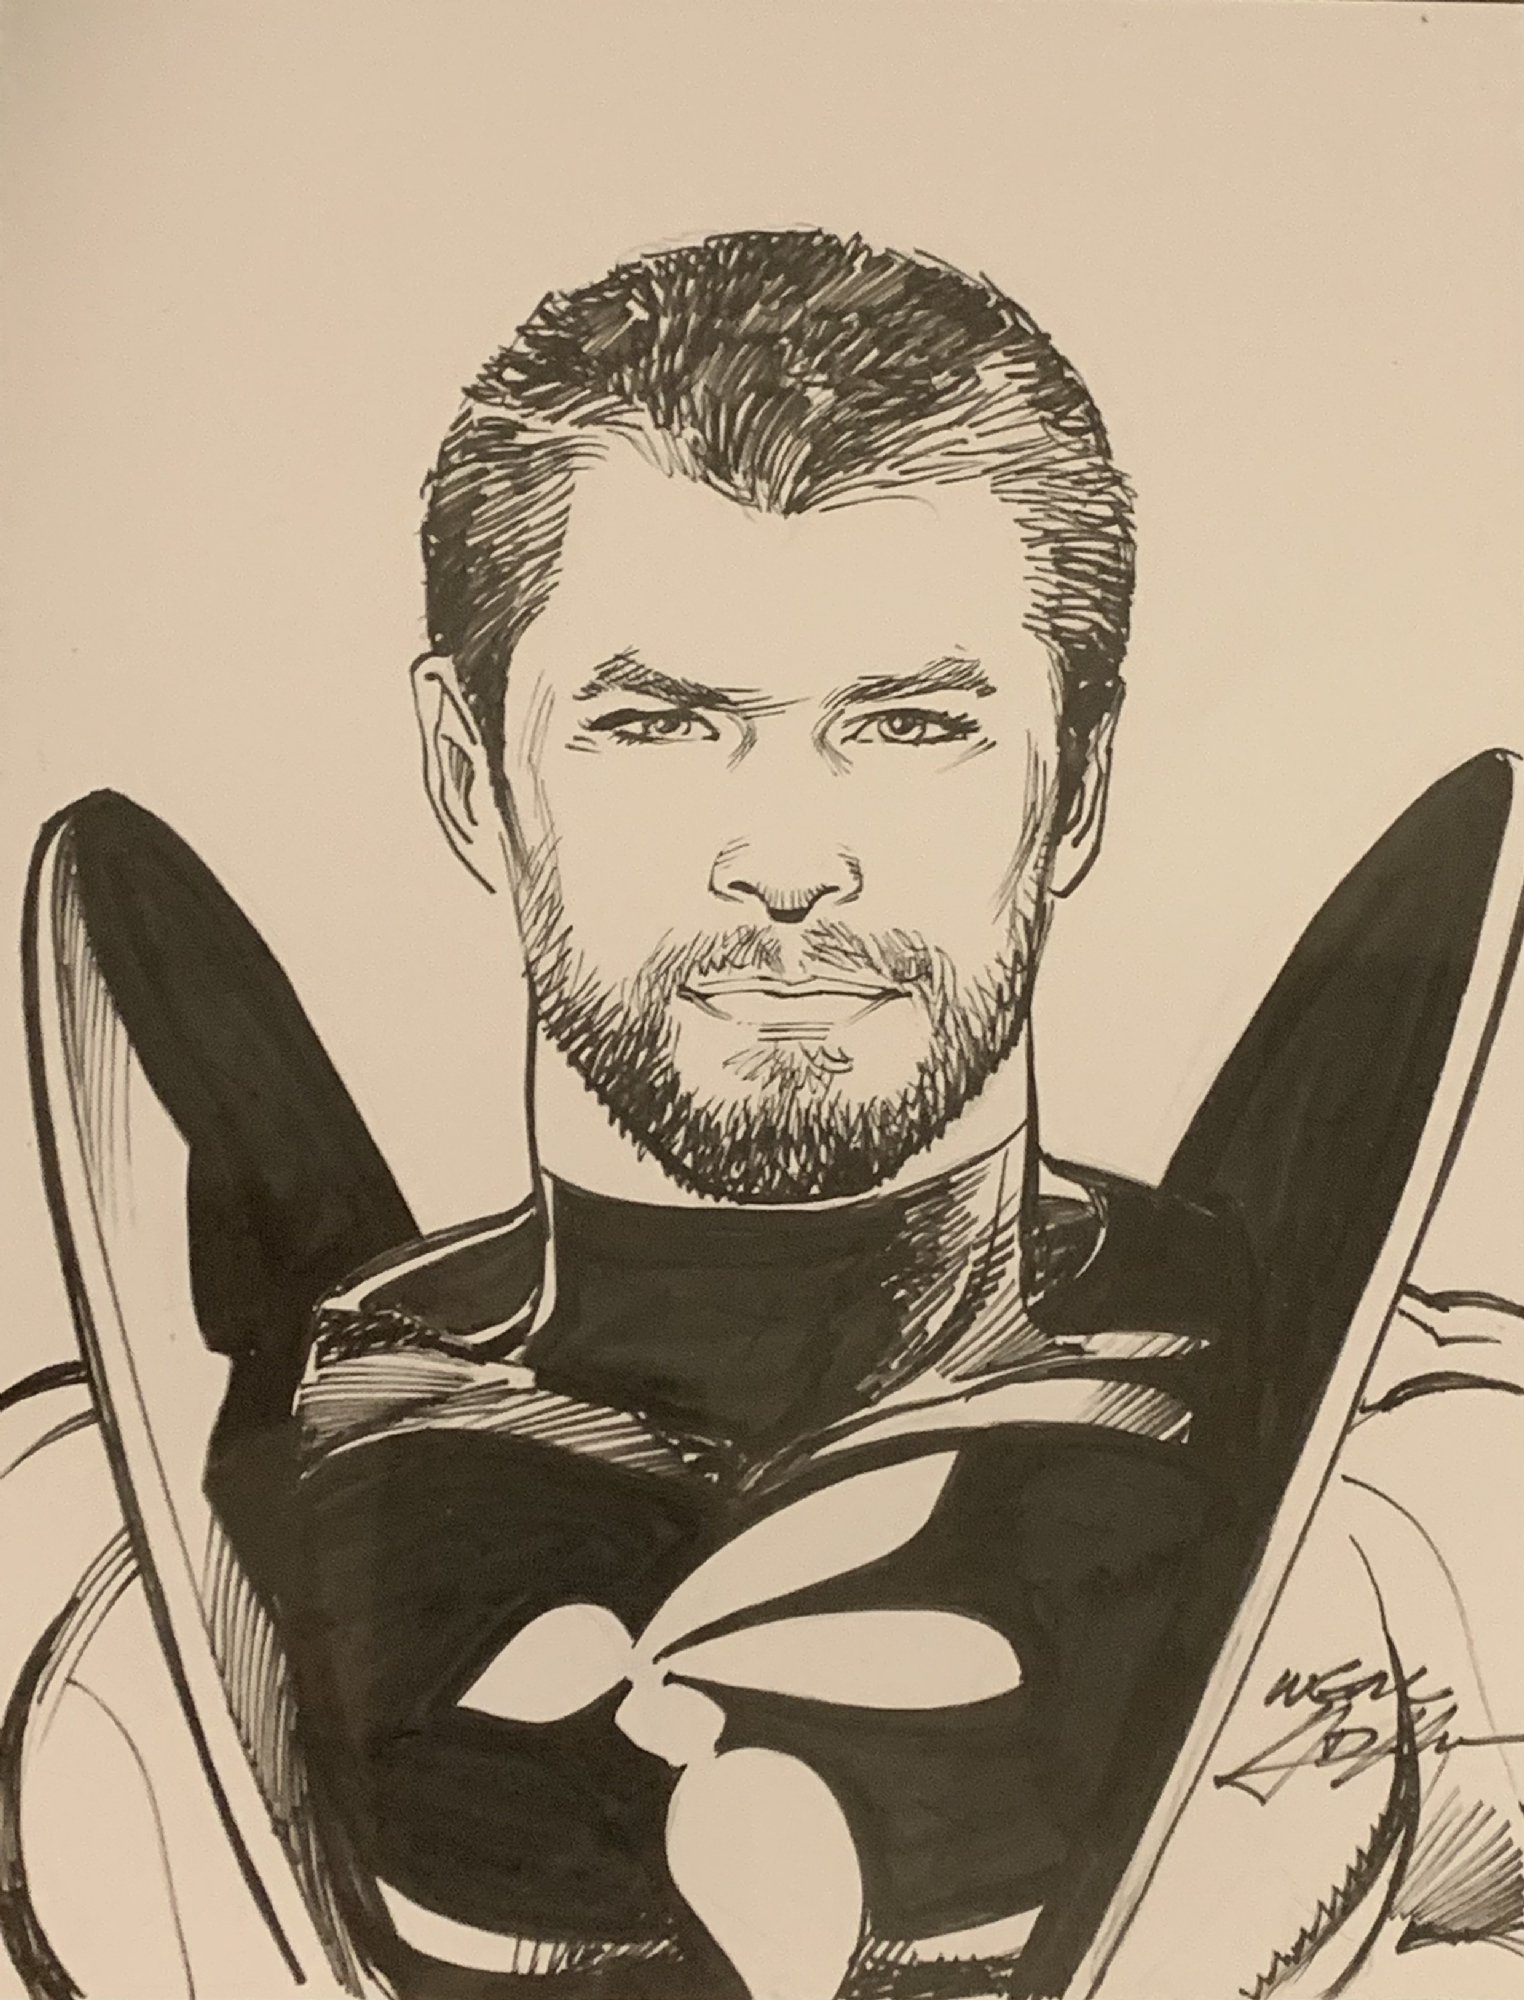 Painting with finished crayons ... Chris Hemsworth